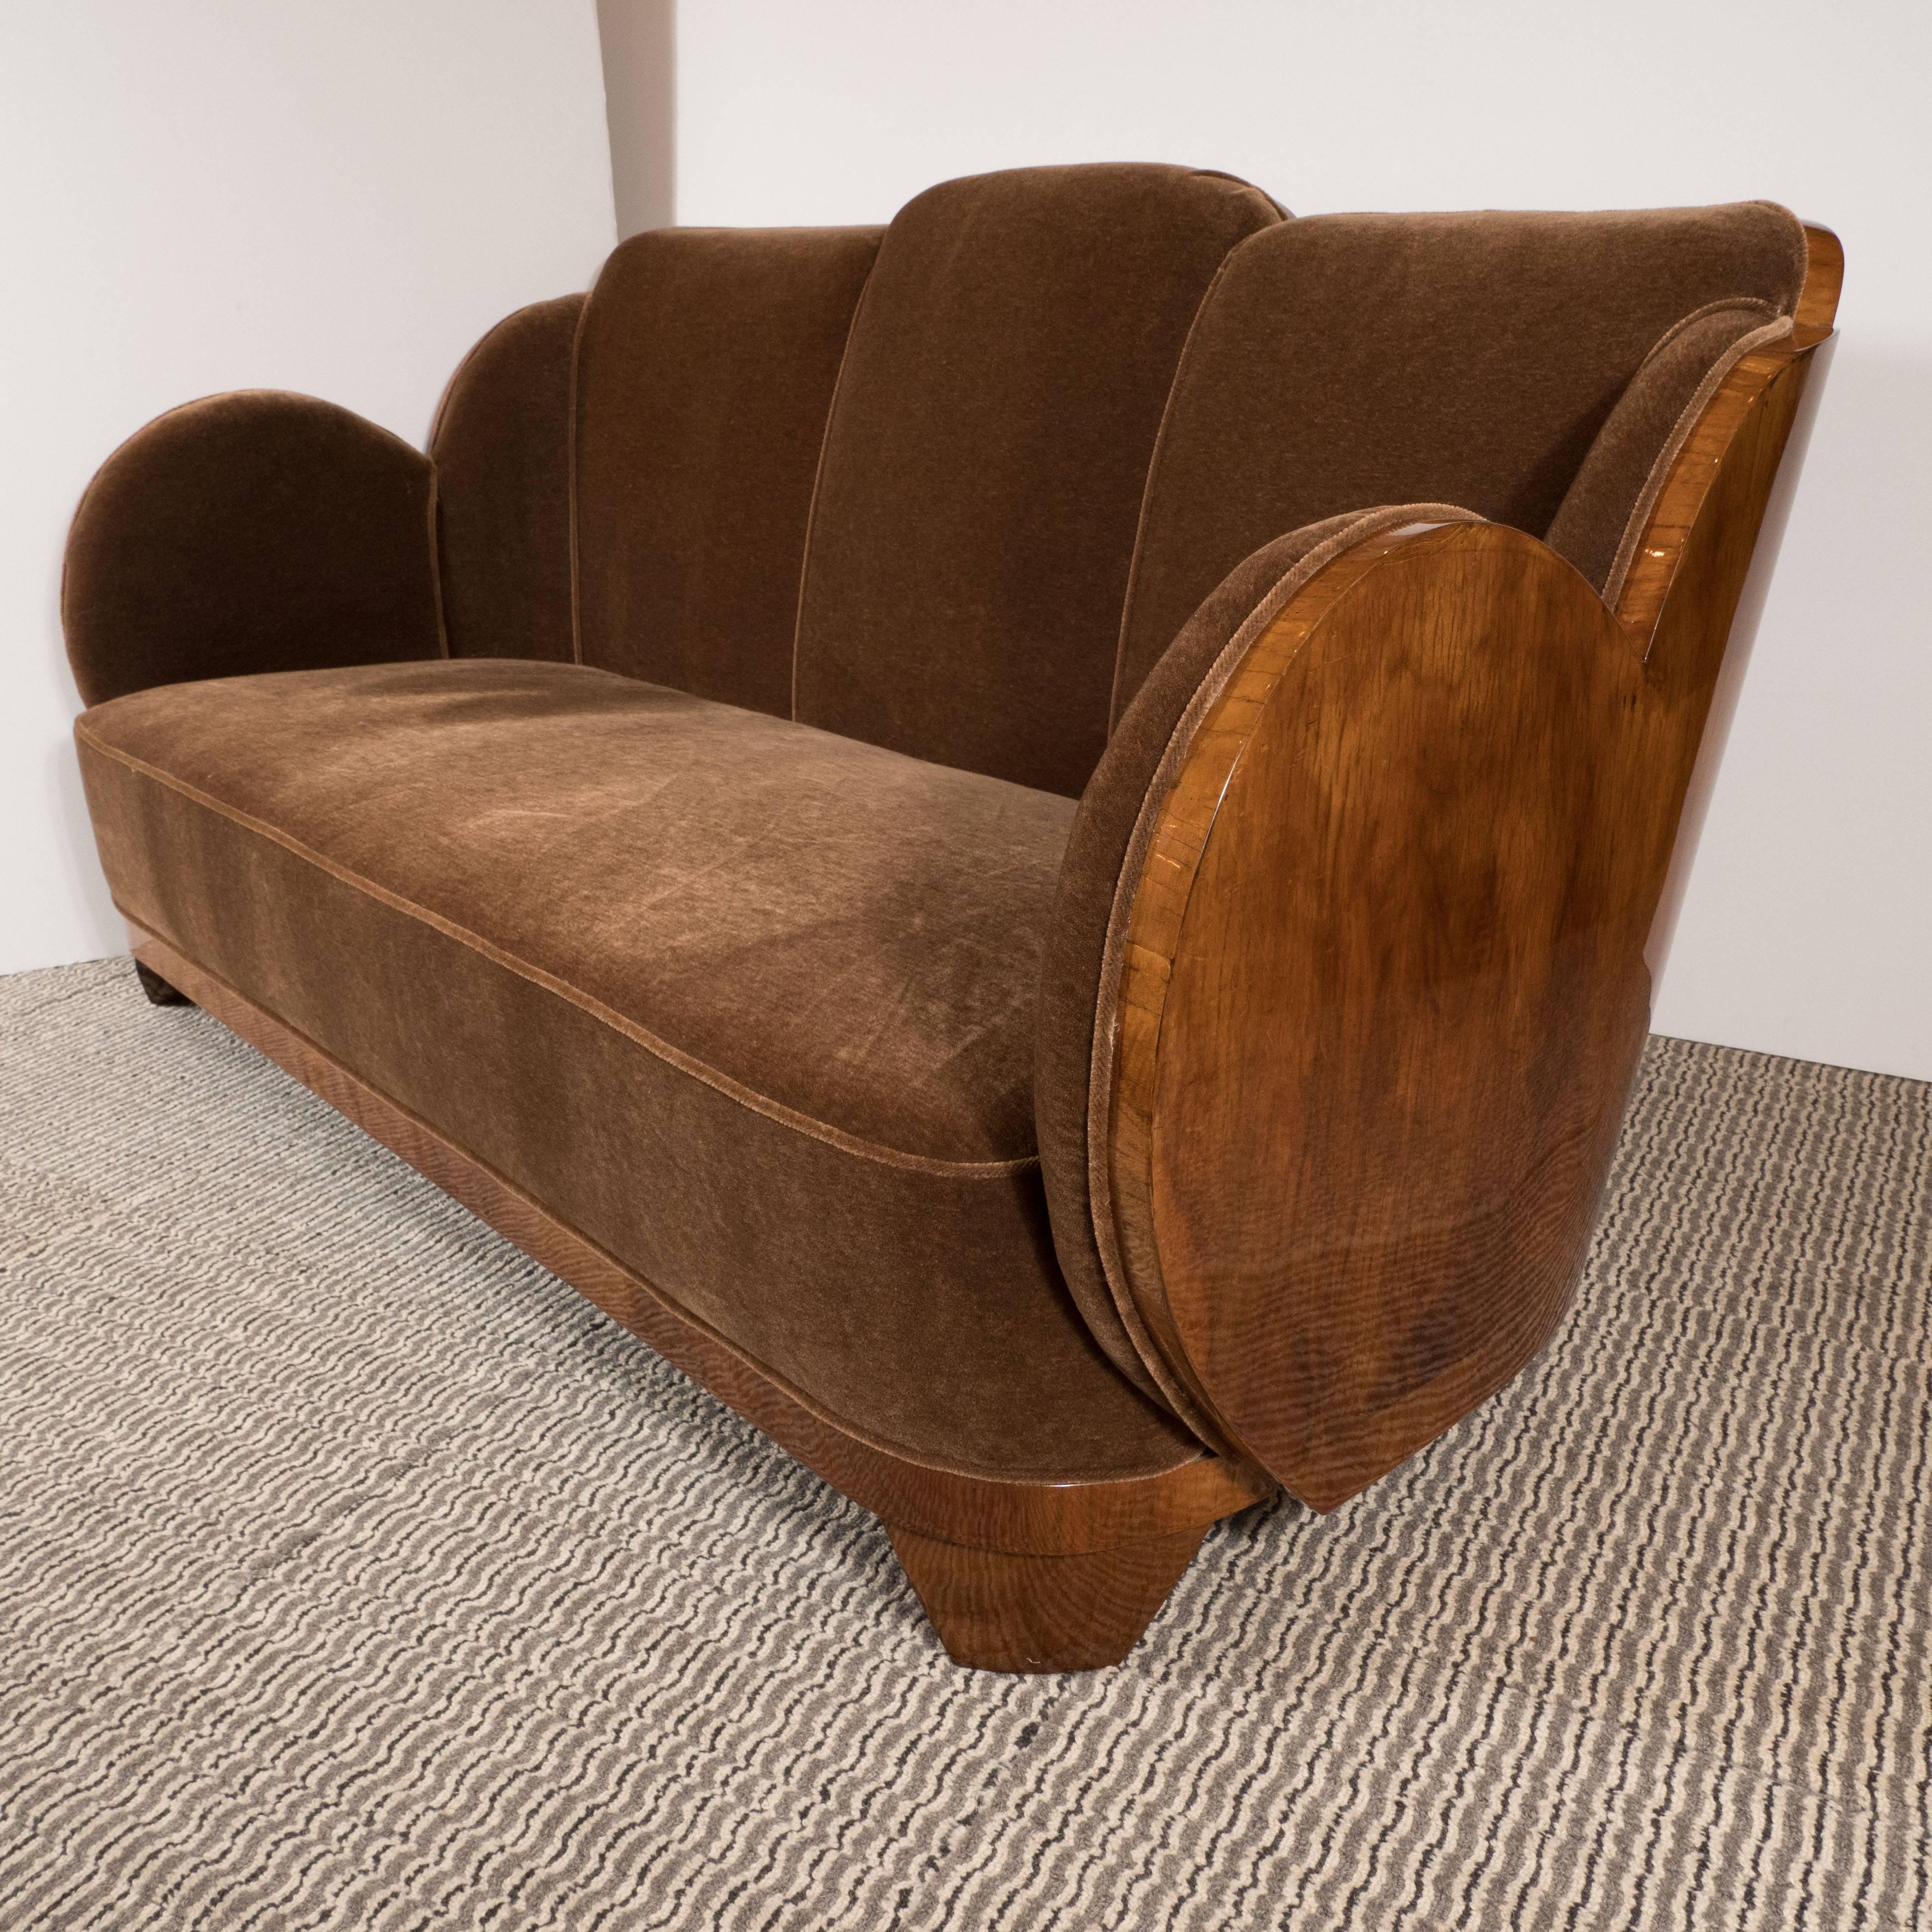 This streamline "Cloud" series Art Deco sofa or loveseat features elegant undulating curves of book-matched walnut, tapered pentagonal feet, perimeter piping, and luxurious mohair in a smoked topaz hue. This impeccably crafted sofa defines